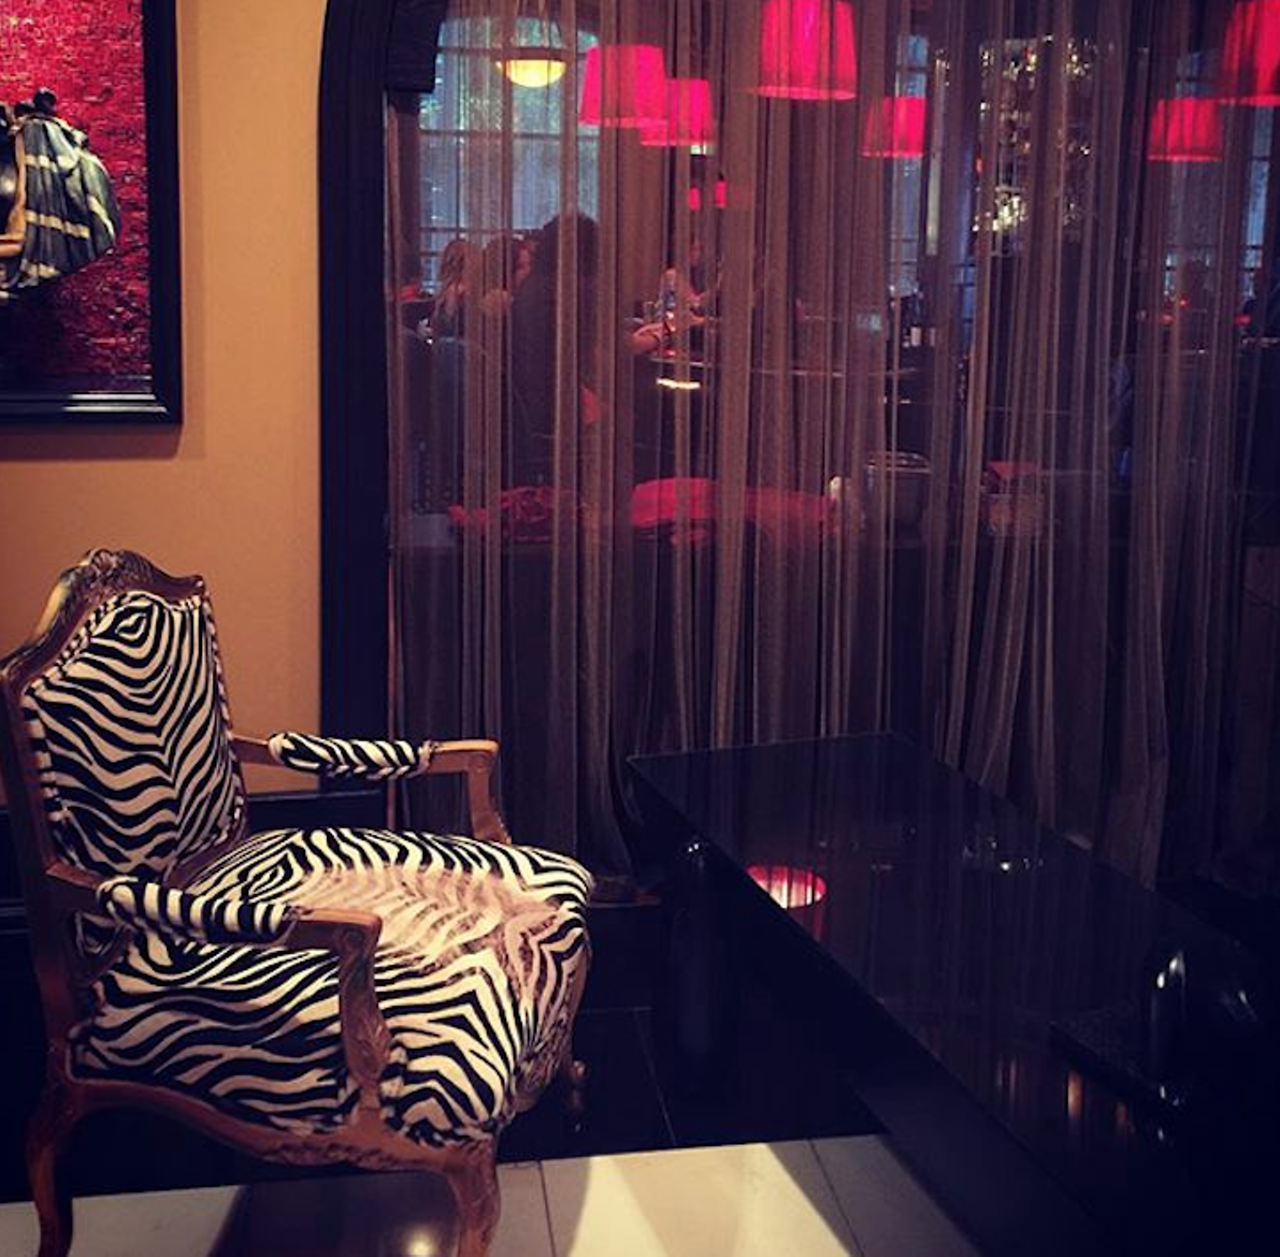 14. In a secluded booth at the B&ouml;sendorfer Lounge
This classy bar has an air of cool about it. It's bound to transfer over to the moves you'll plan to make.
Photo via jeseniabrooks/Instagram